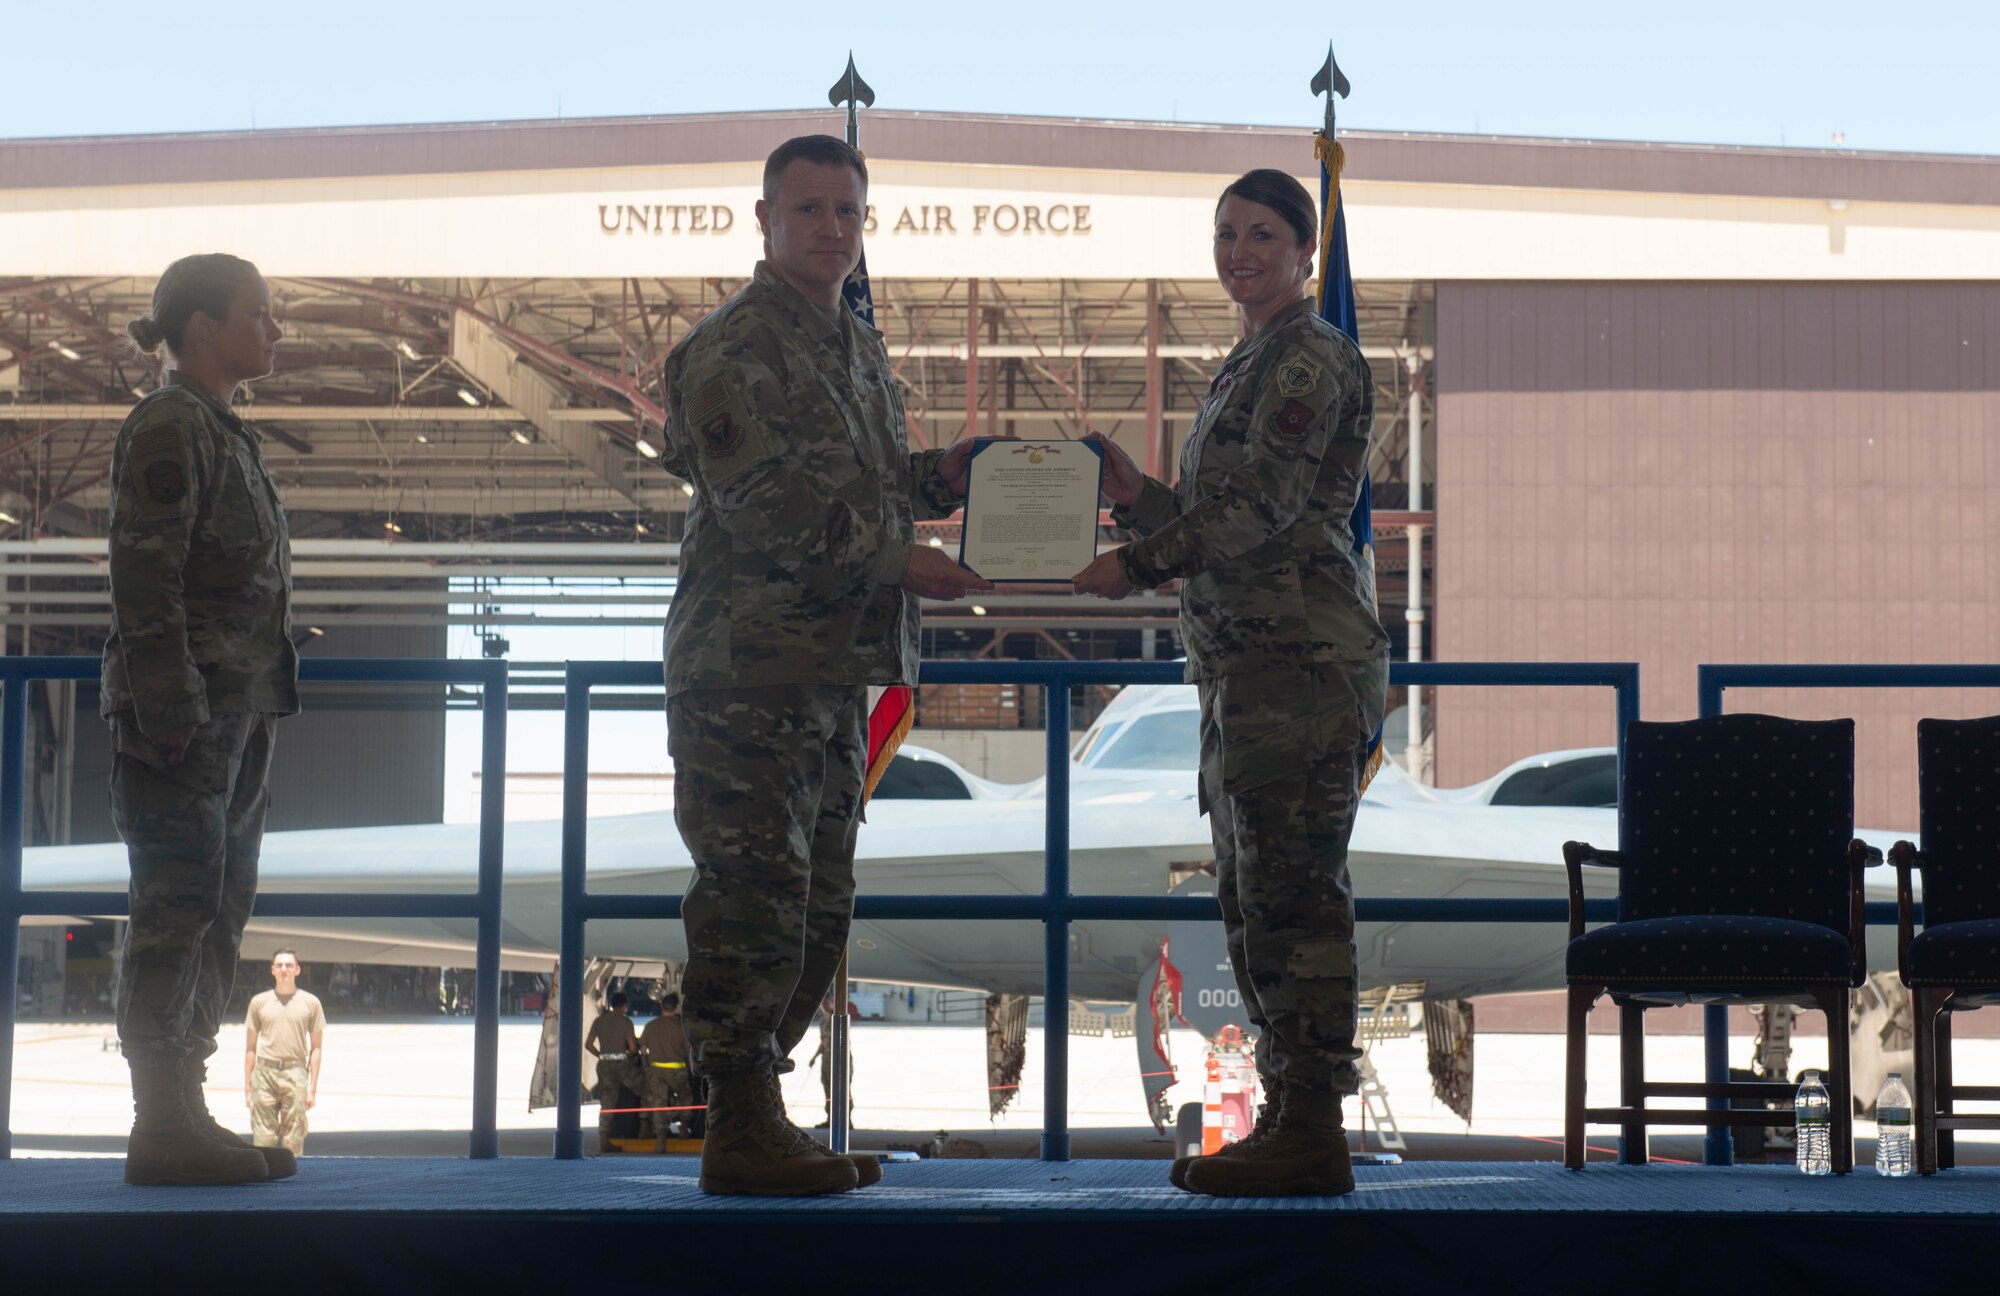 U.S. Air Force Maj. Michael Hillier assumed command of the 509th Munitions Squadron from U.S. Air Force Lt. Col. Allison Barkalow. A change of command is a military tradition that represents a formal transfer of authority and responsibility for a unit from one commanding officer to another.